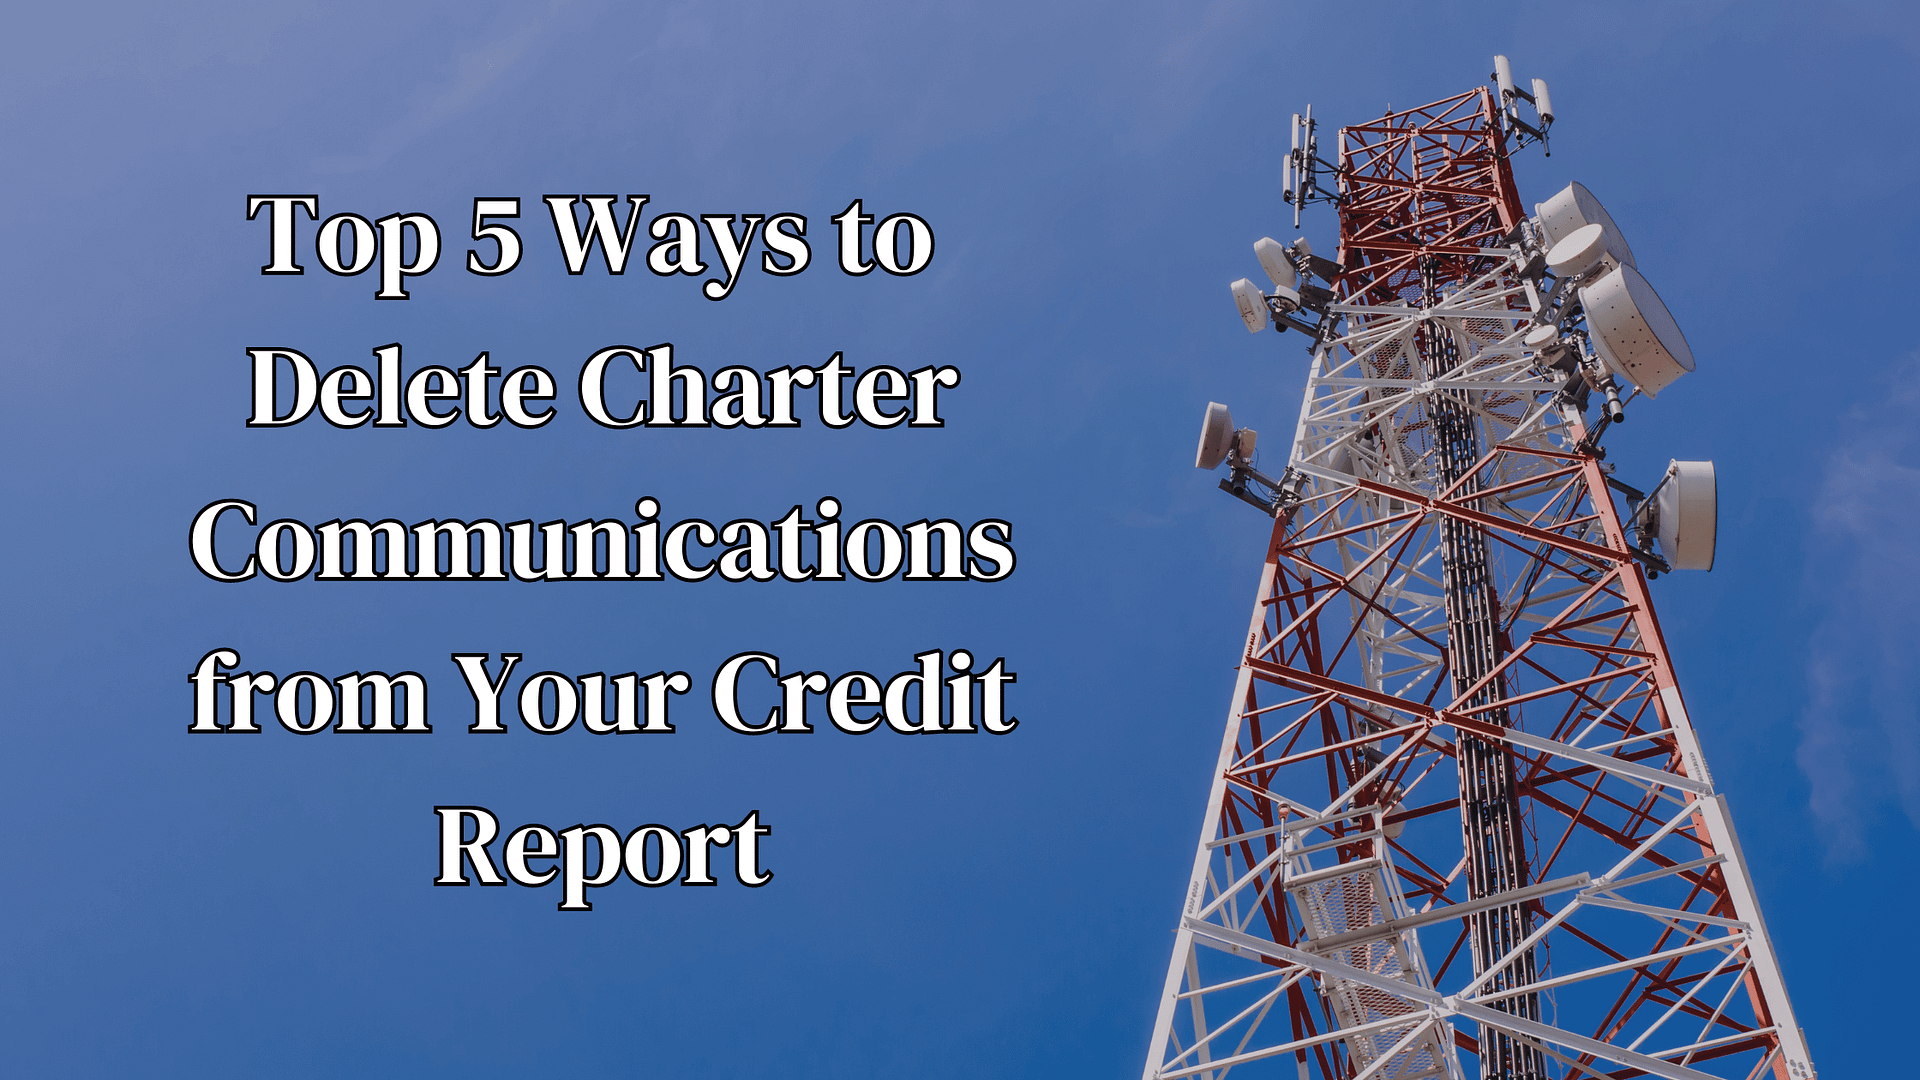 Top 5 Ways to Delete Charter Communications from Your Credit Report